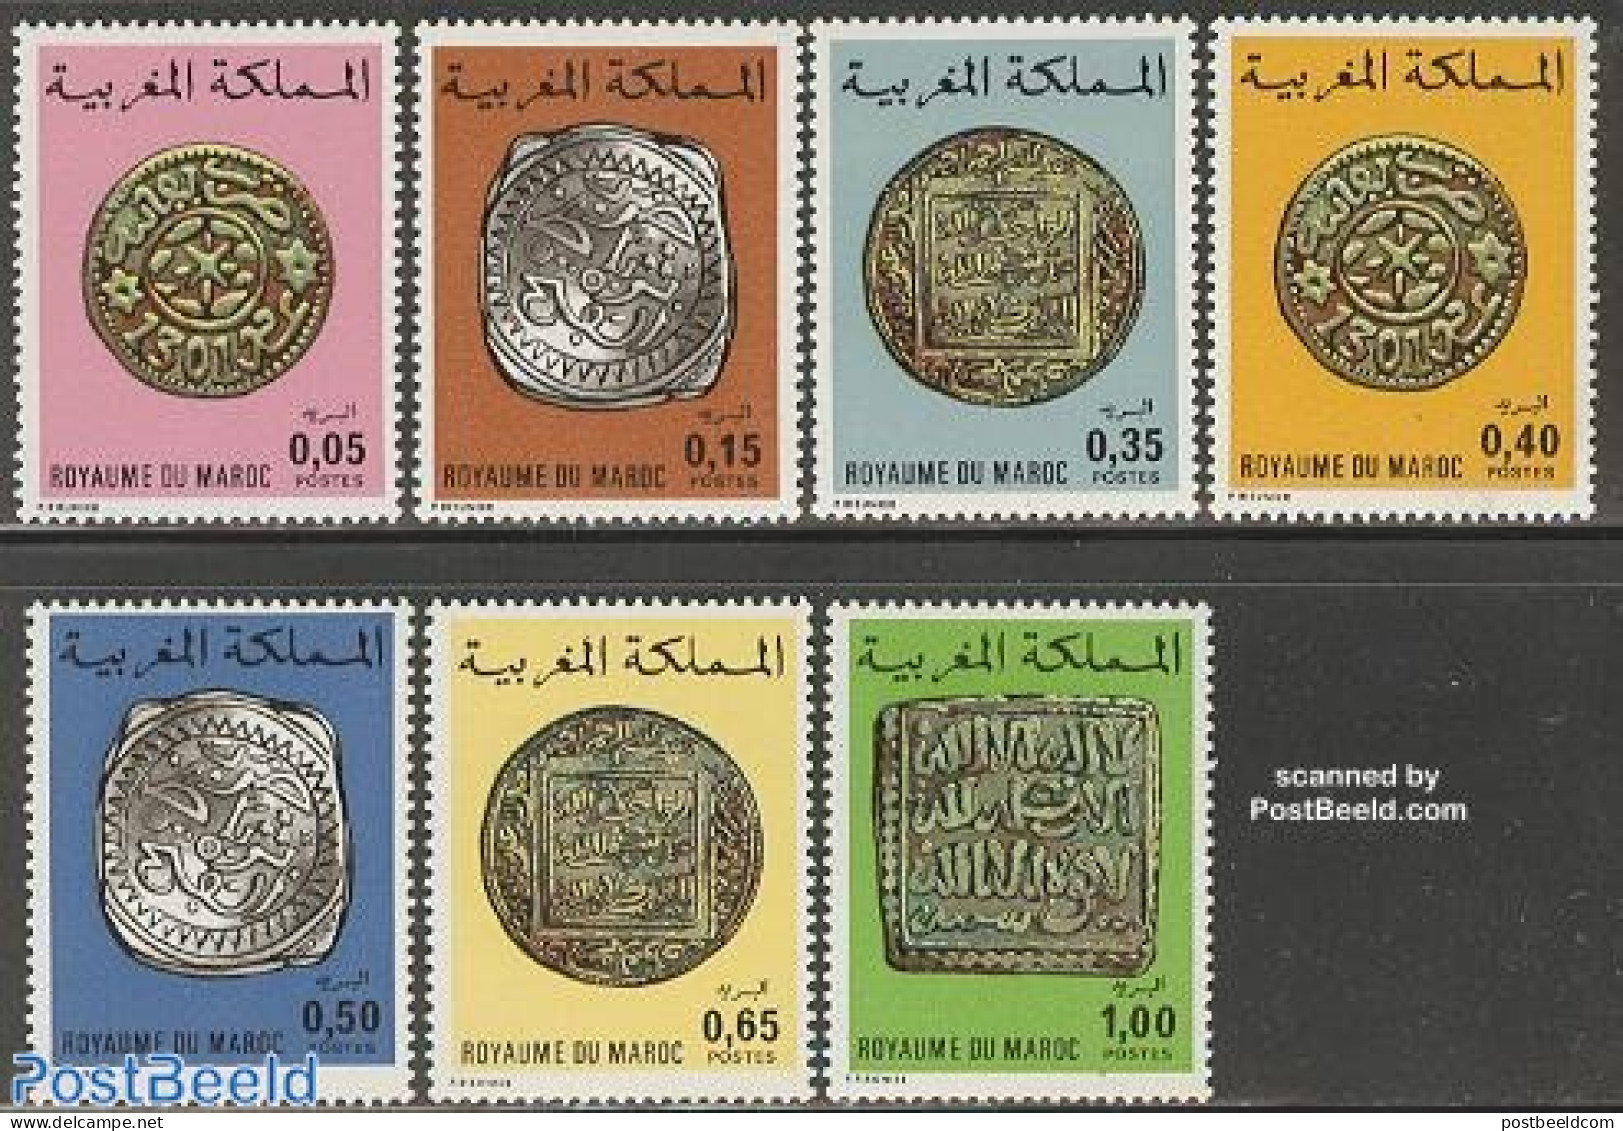 Morocco 1976 Coins 7v, Mint NH, Various - Money On Stamps - Coins